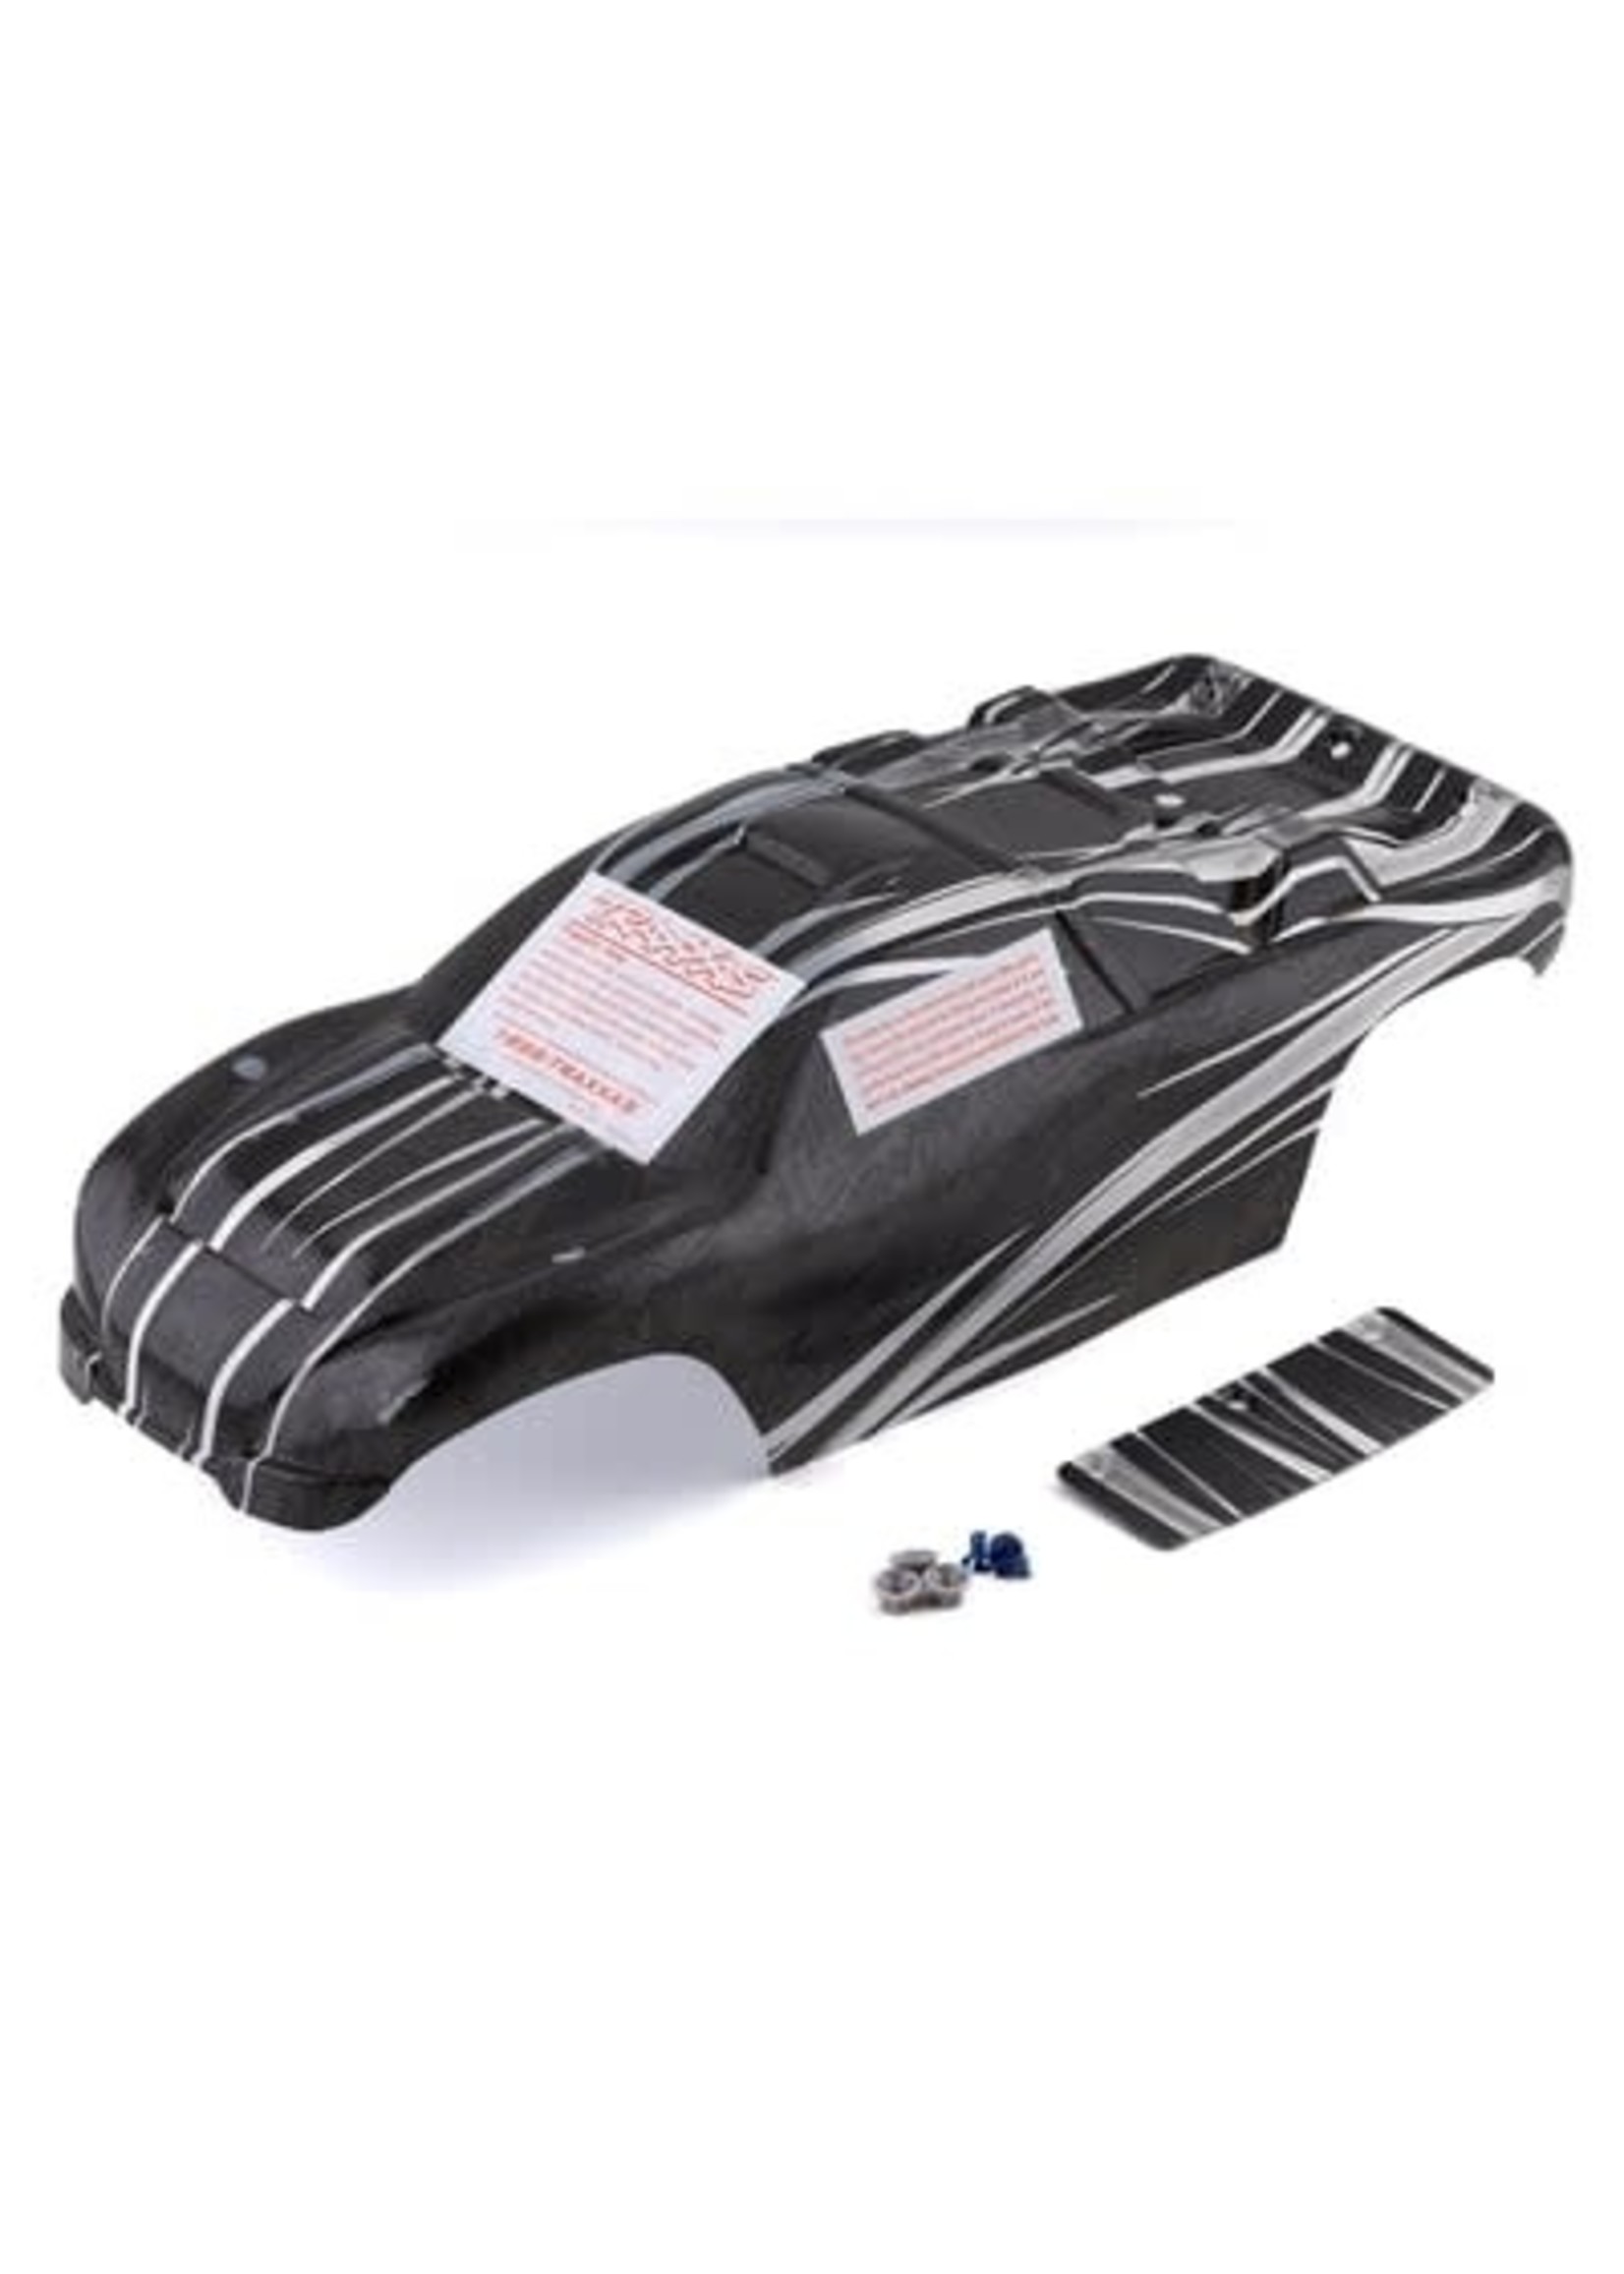 Traxxas 3719  Body, Rustler VXL, ProGraphix (replacement for the painted body. Graphics are printed, requires paint & final color application)/decal sheet/ wing and aluminum hardware